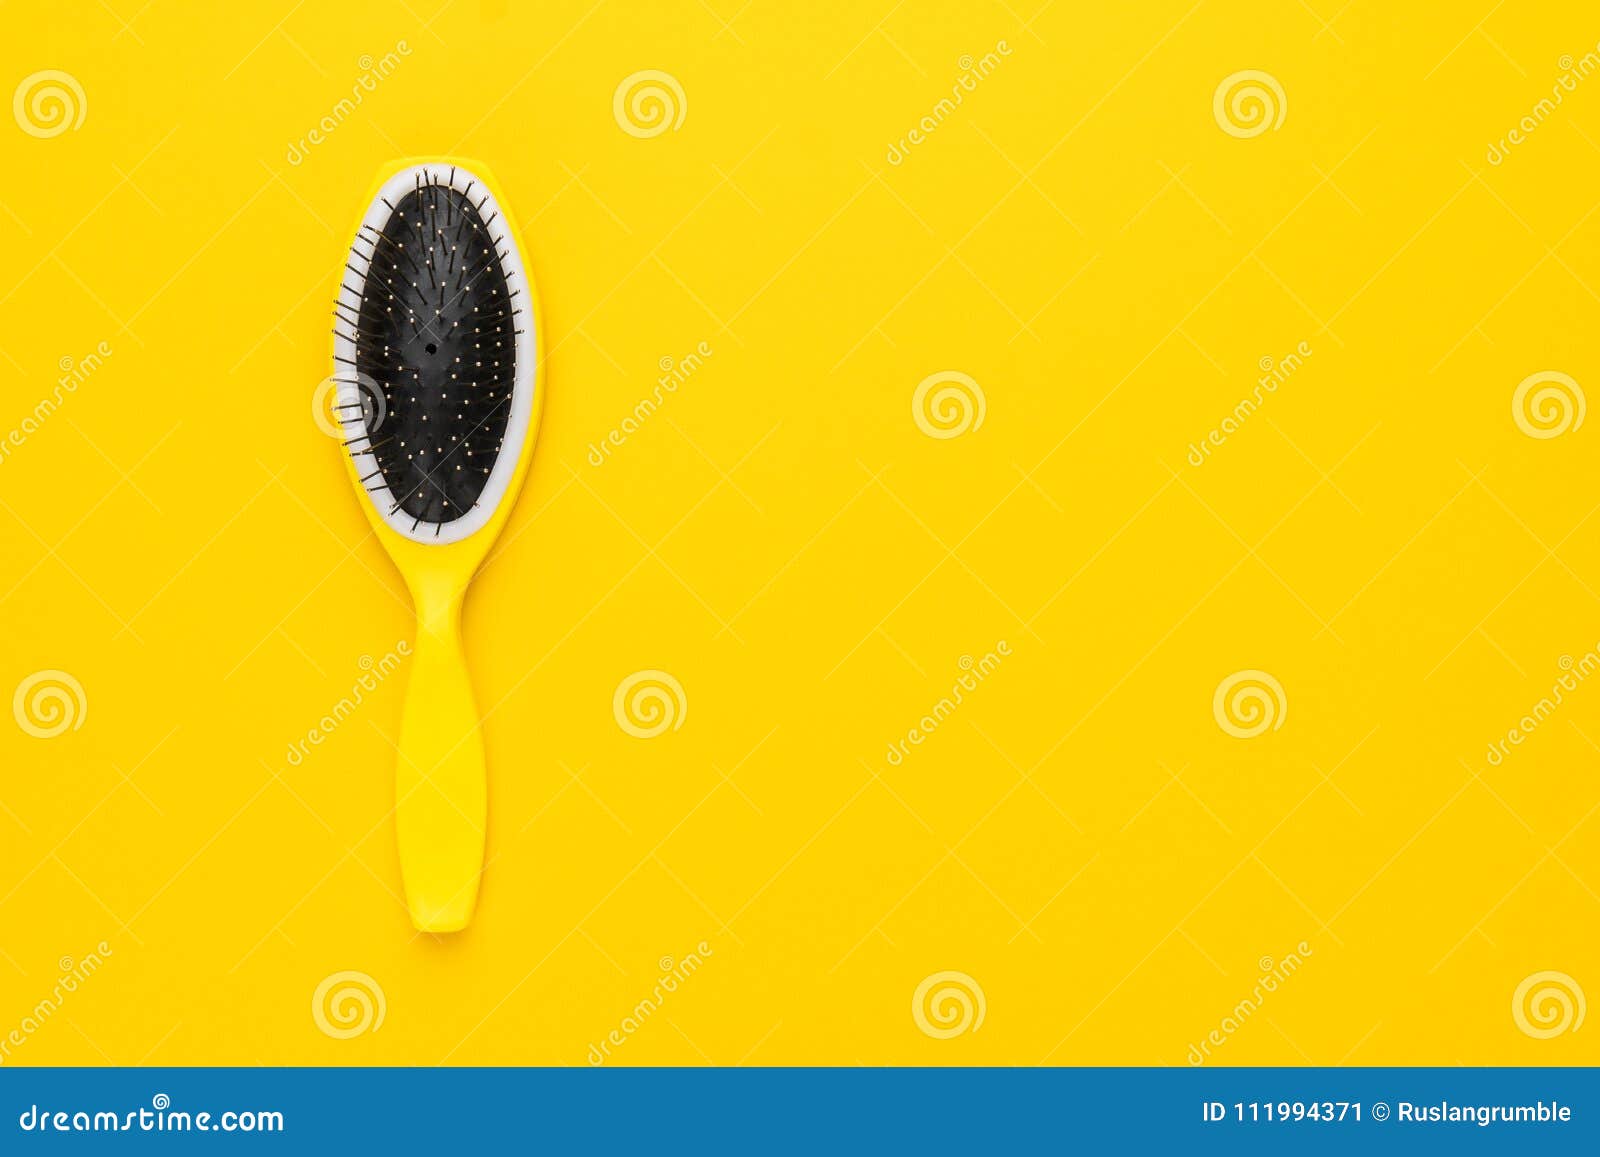 Scalp Massage Comb On The Yellow Background With Copy Space Stock Image 